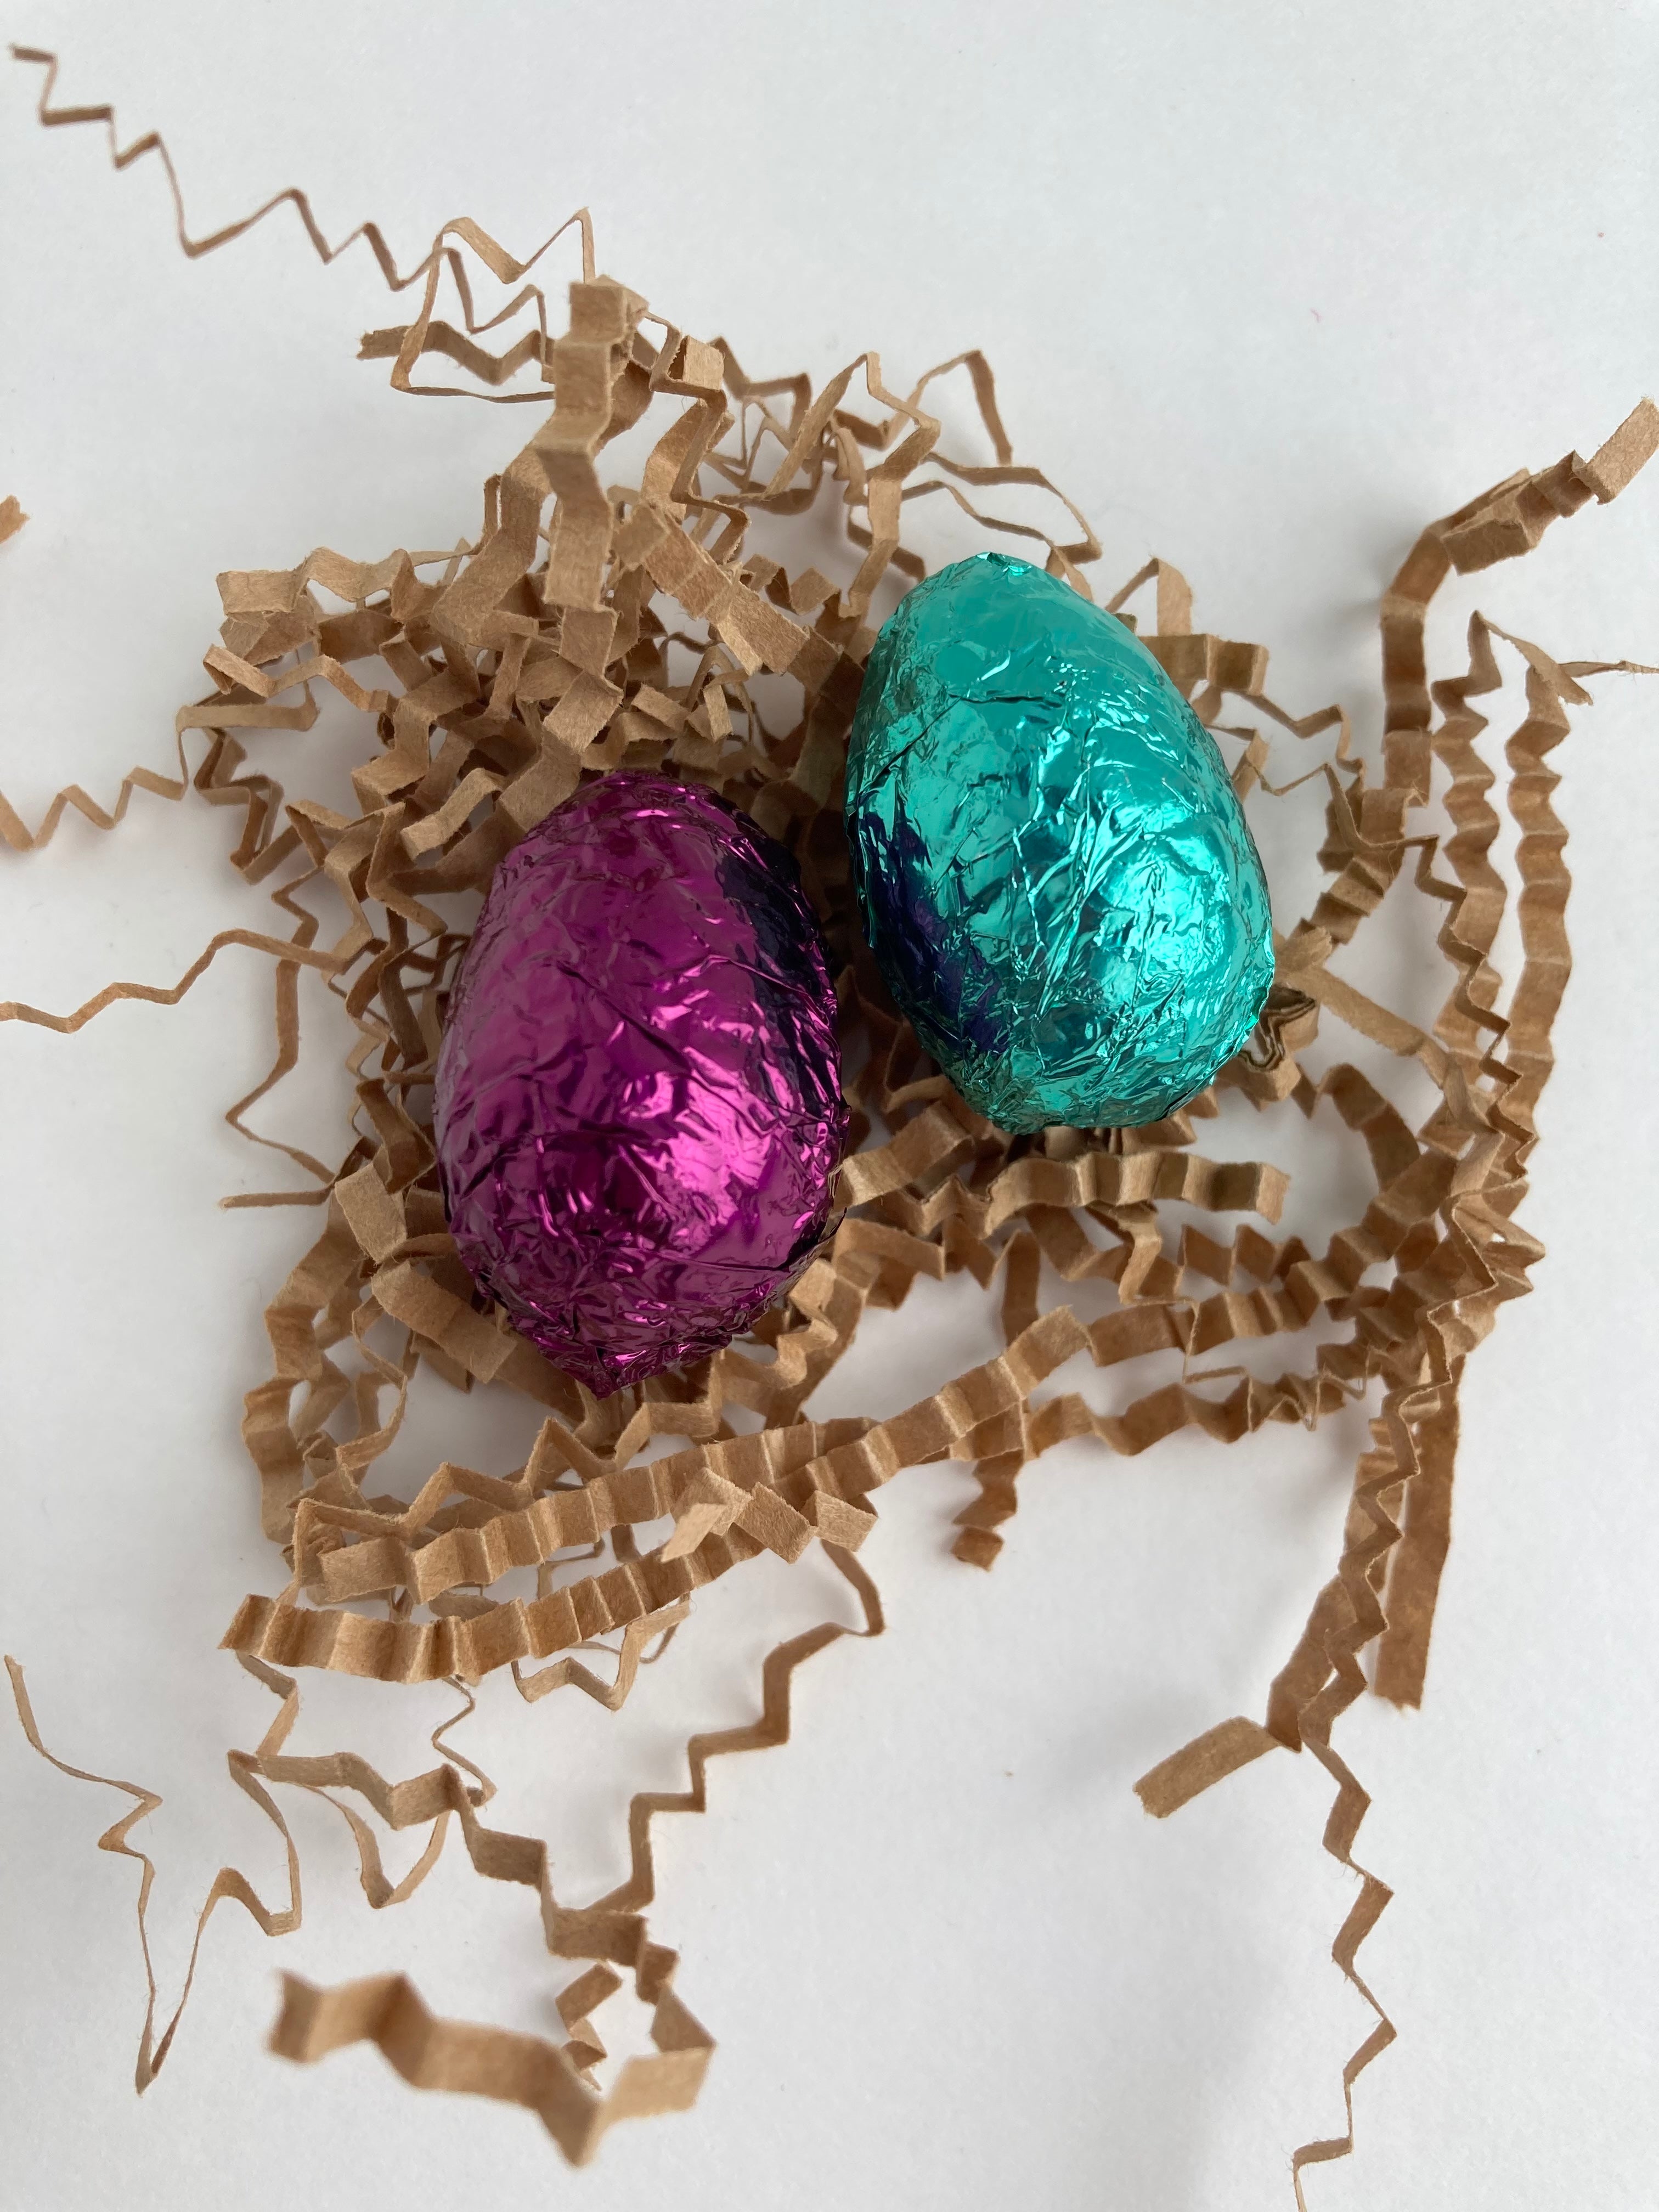 Chocolate Foil Wrapped Eggs from Kenny's Chocolates